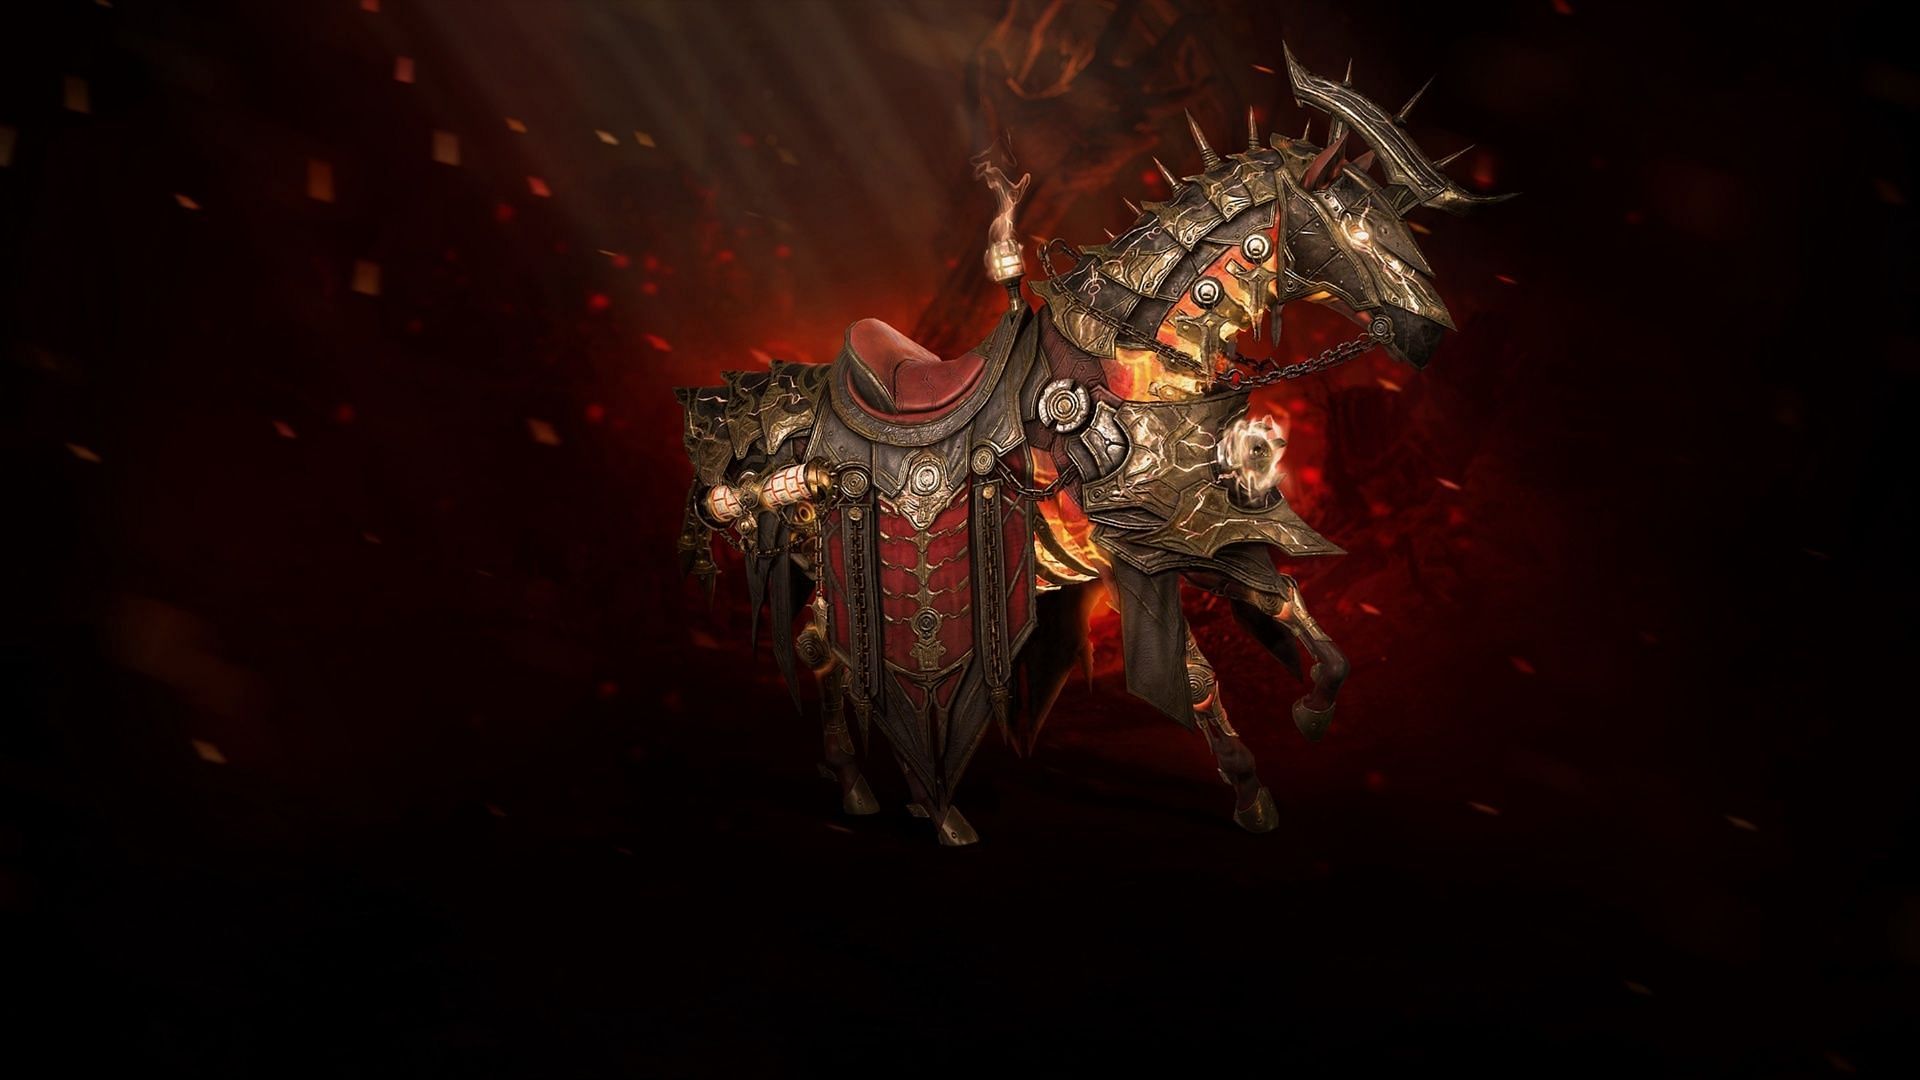 There are some amazing mount armors available this season (Image via Blizzard Entertainment)